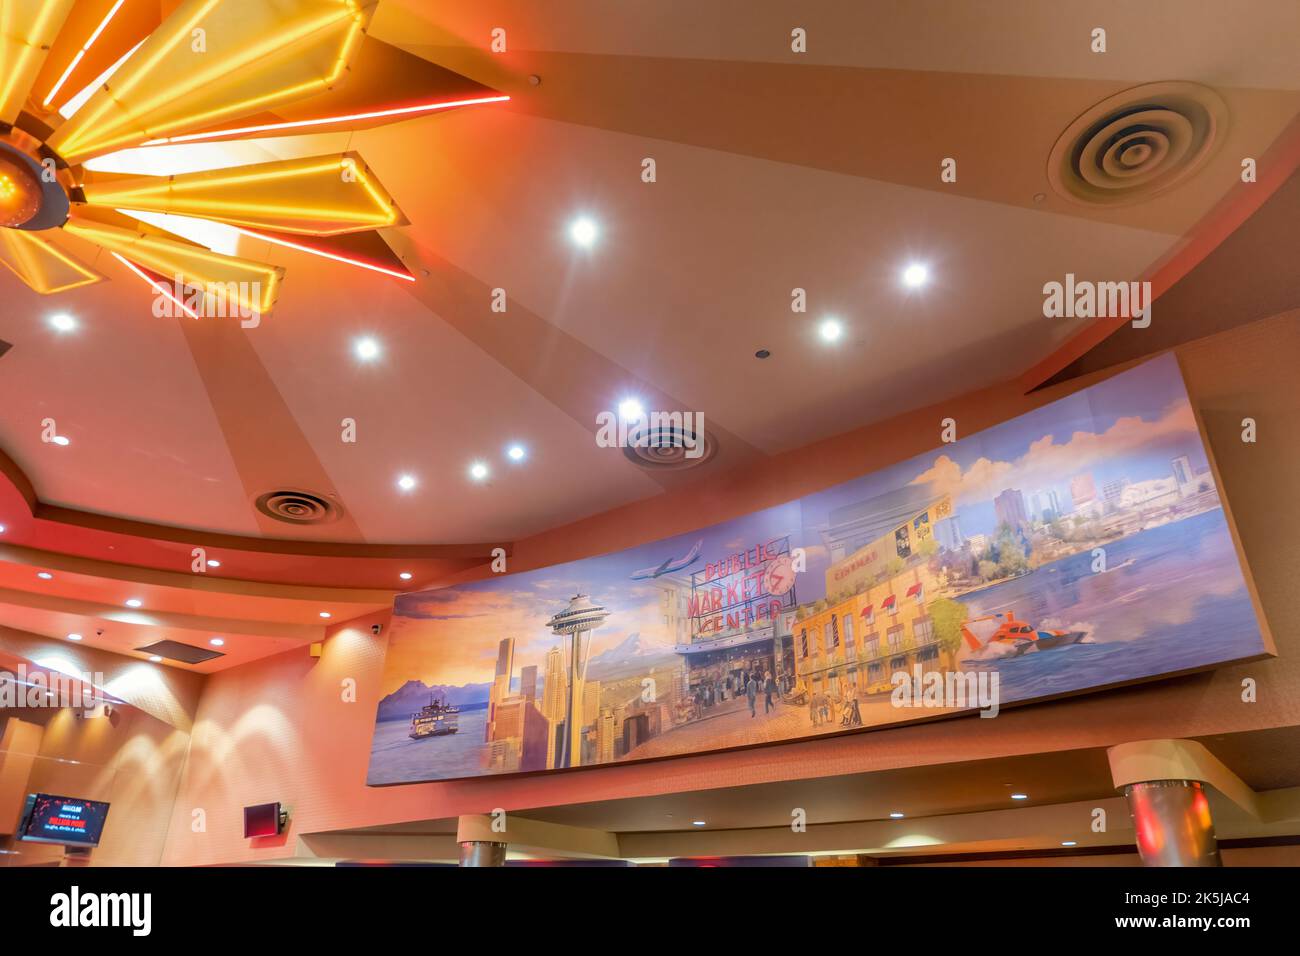 The movie theater lobby displaying a panoramic mural of Seattle in the Lincoln Square Mall located in Bellevue, Washington. Stock Photo